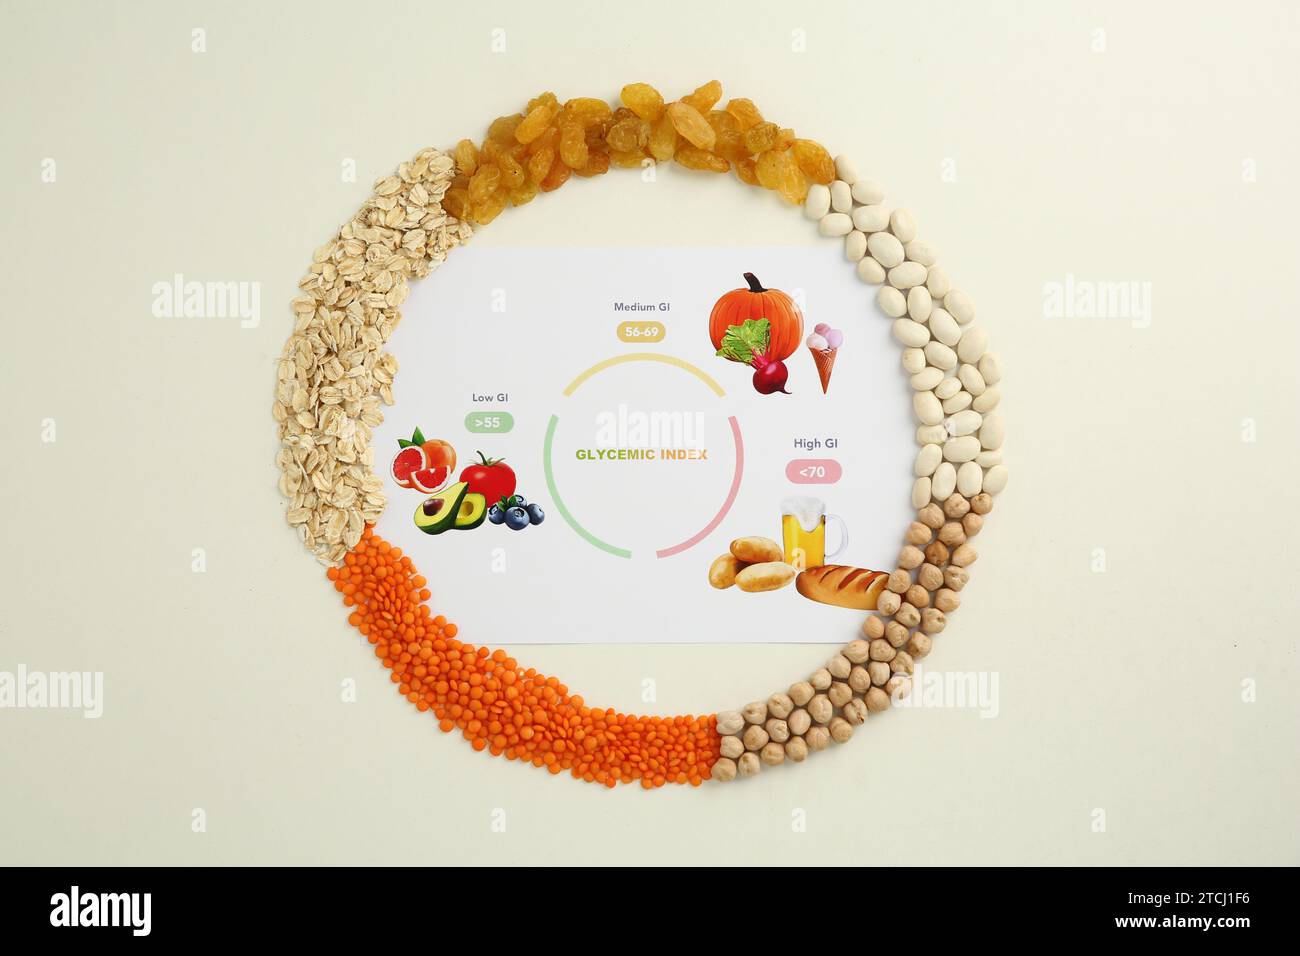 Paper with glycemic index chart and products on white table, flat lay Stock Photo